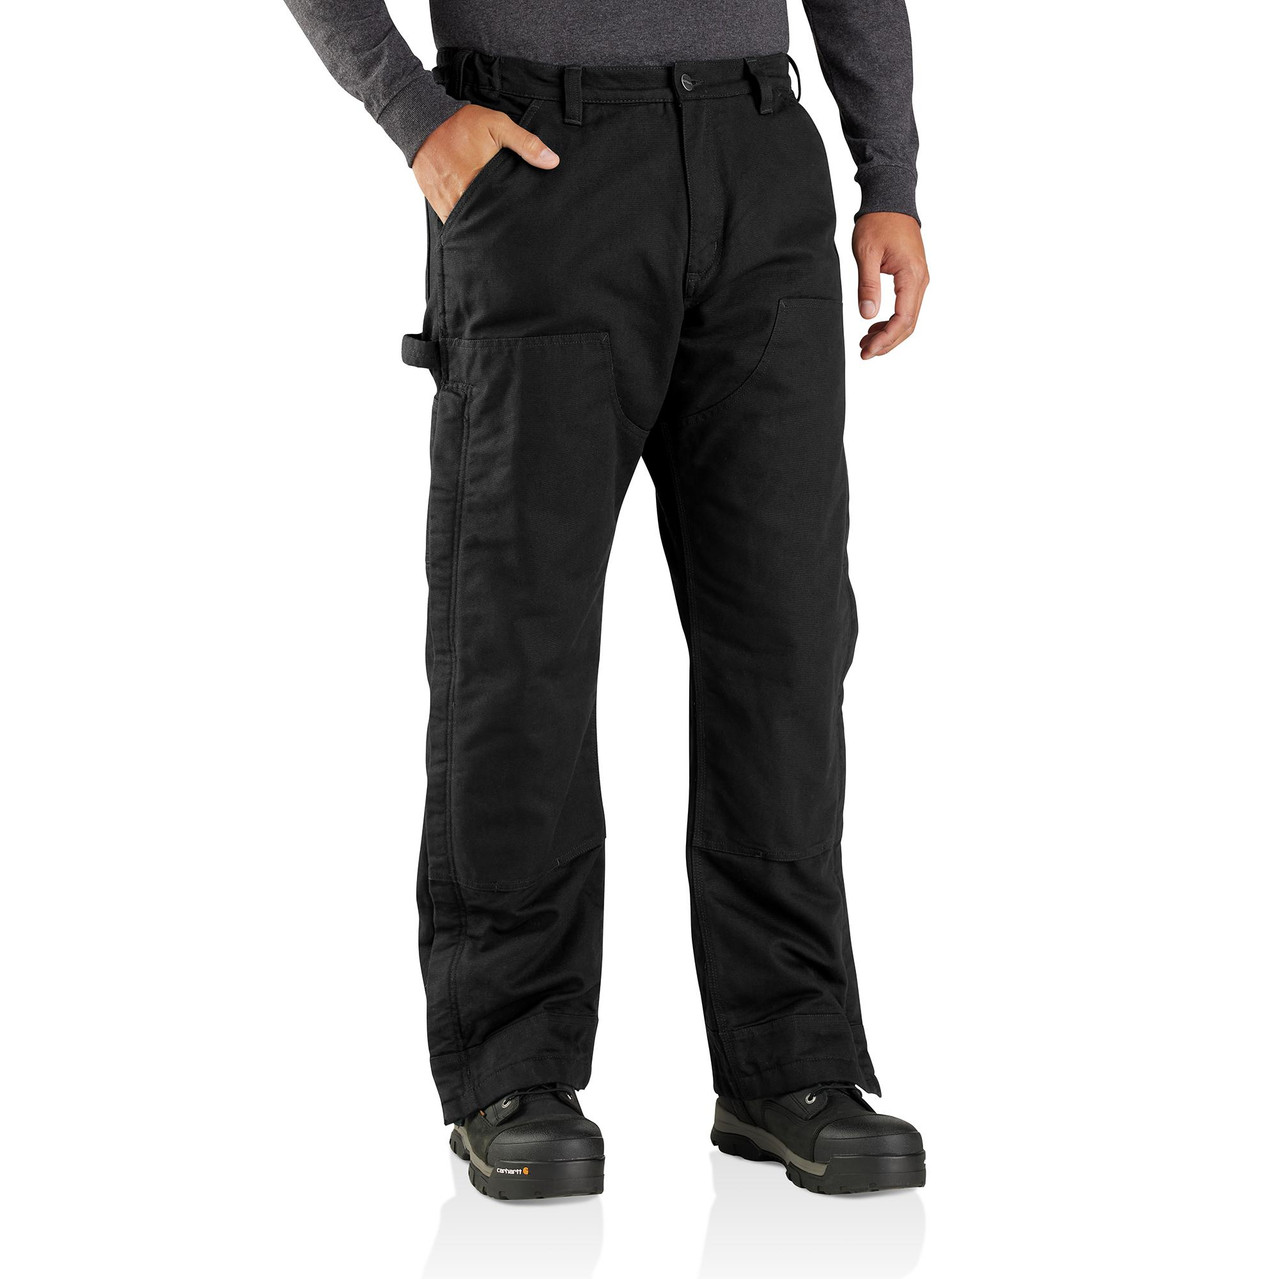 Buy Cargo Pants for Men Relaxed Fit Big and Tall Pants Combat Work